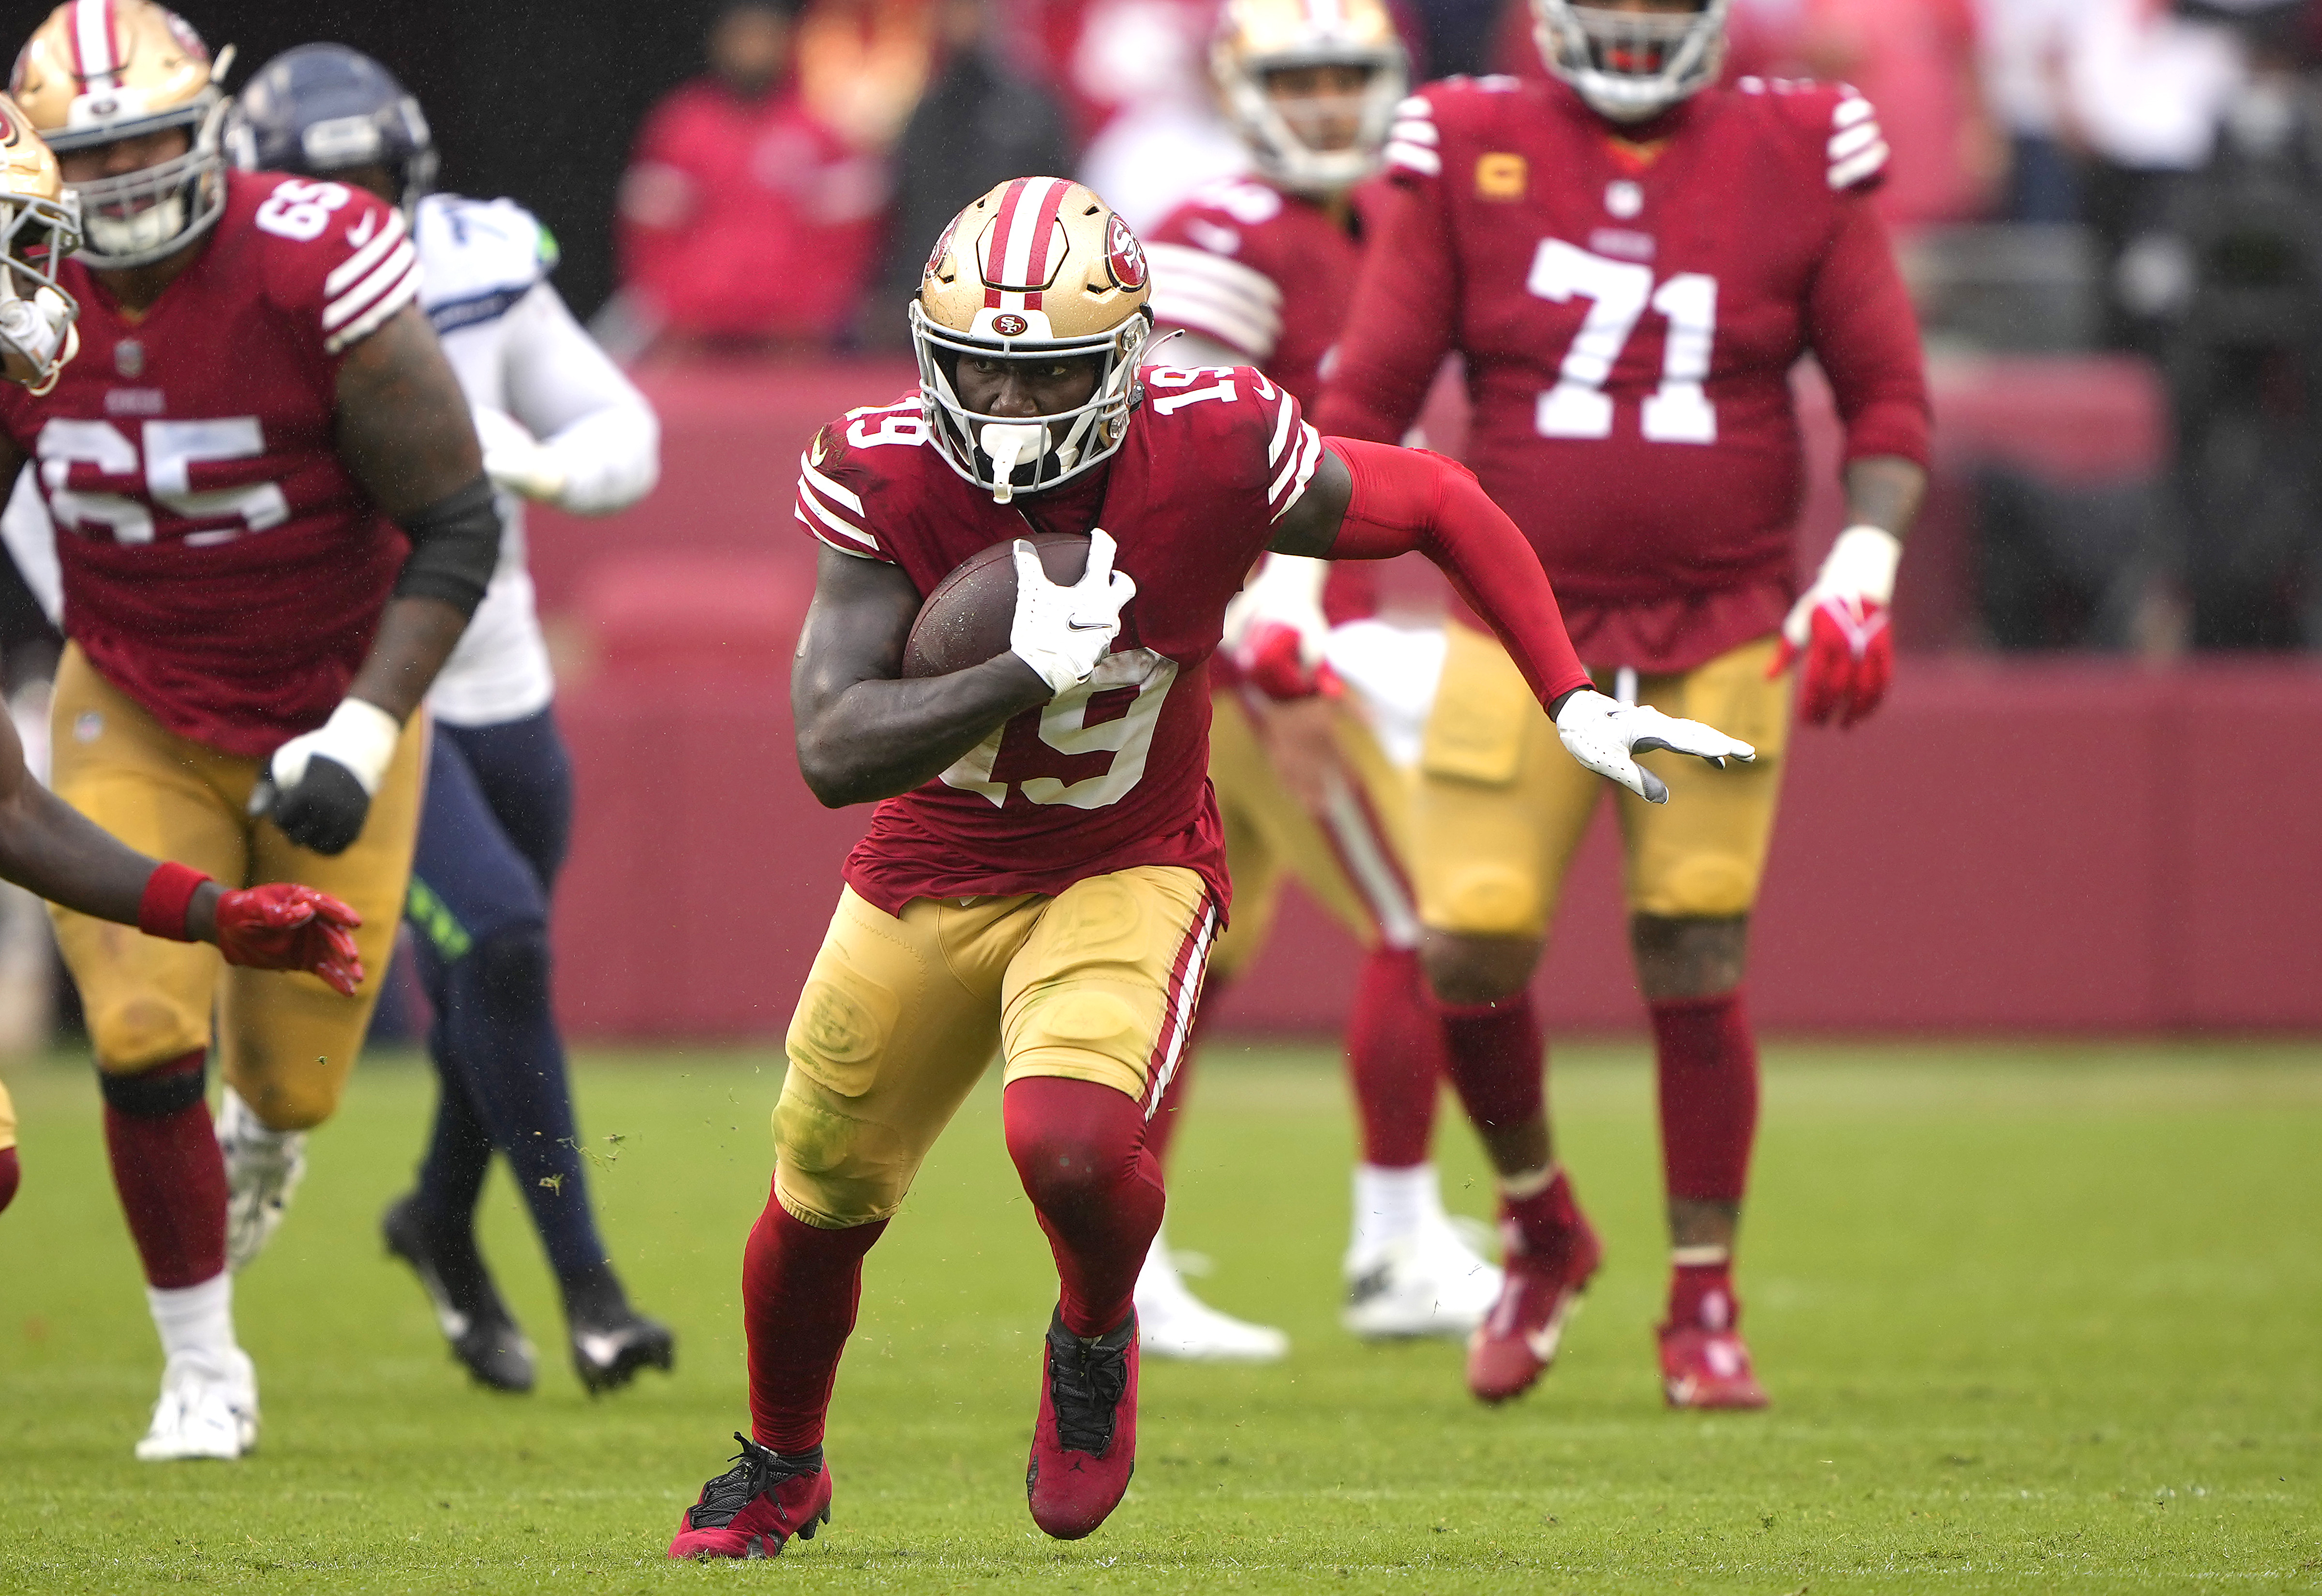 Deebo Samuel #19 of the San Francisco 49ers runs with the ball after making a catch against the Seattle Seahawks during the second half at Levi’s Stadium on September 18, 2022 in Santa Clara, California.